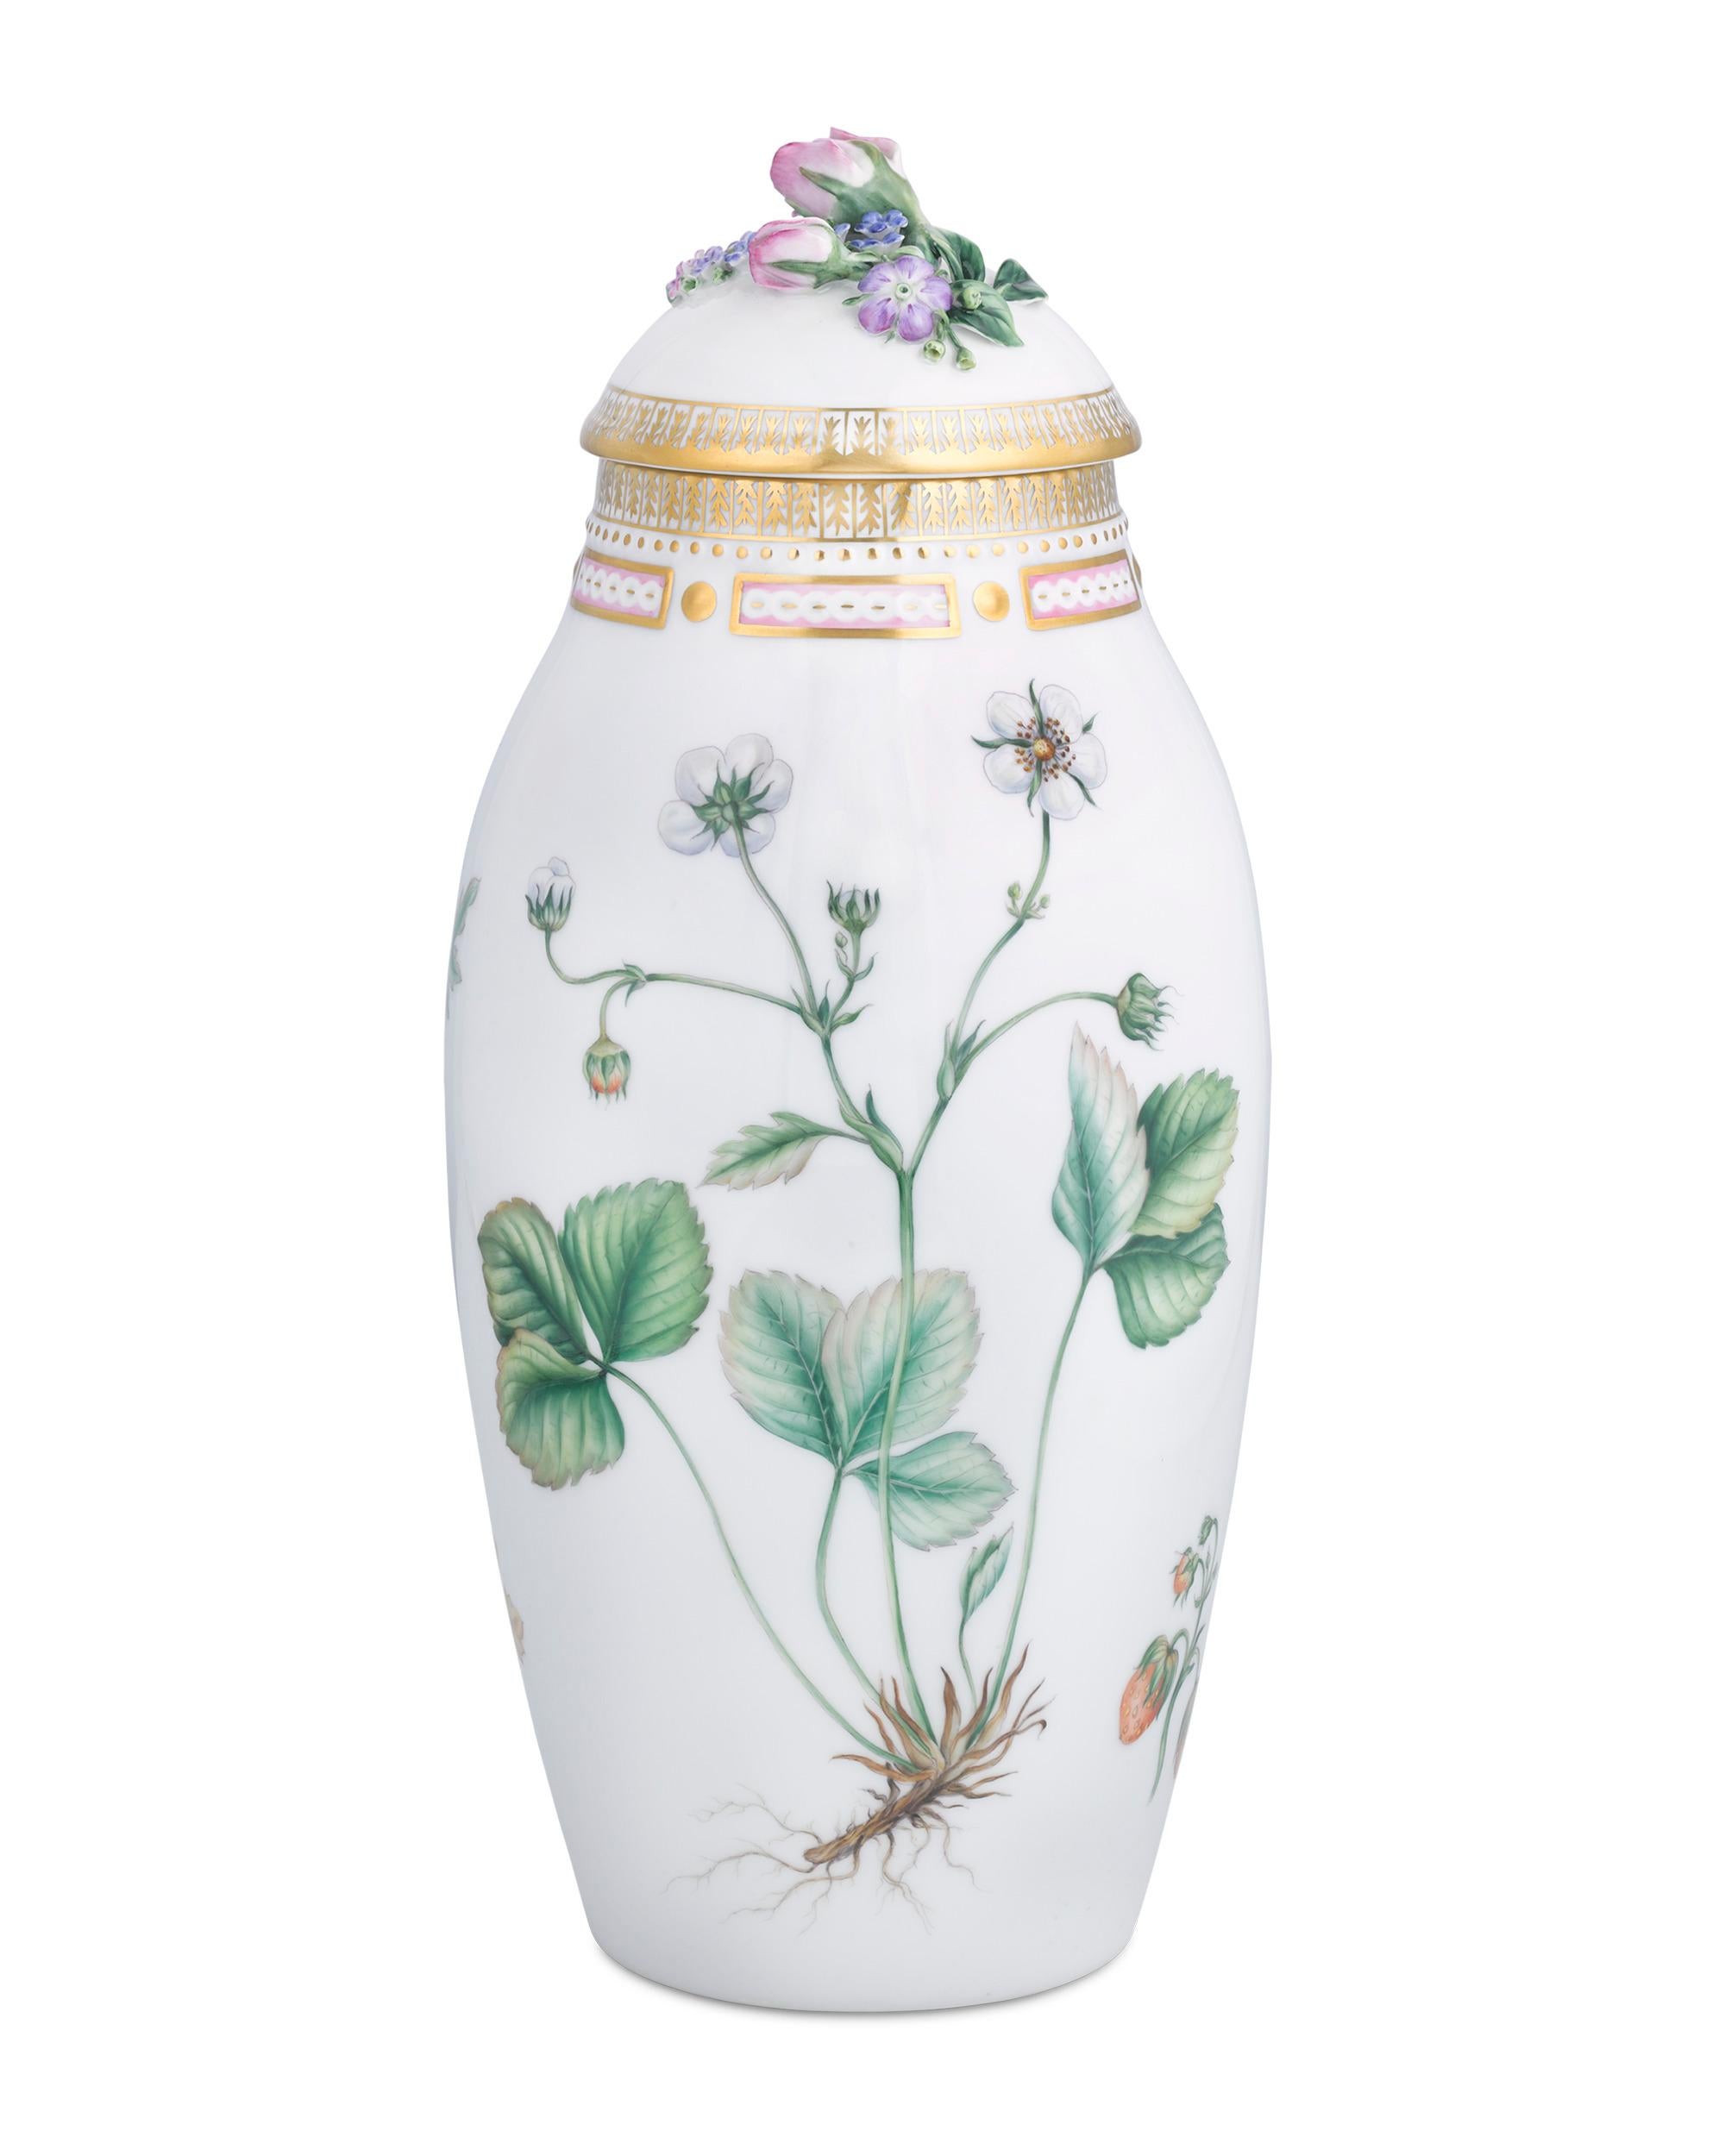 This porcelain covered ginger jar by Royal Copenhagen is crafted in the firm's legendary Flora Danica pattern. Flora Danica ginger jars are extremely rare, and this example exhibits the superior artistry for which this pattern is known, from the